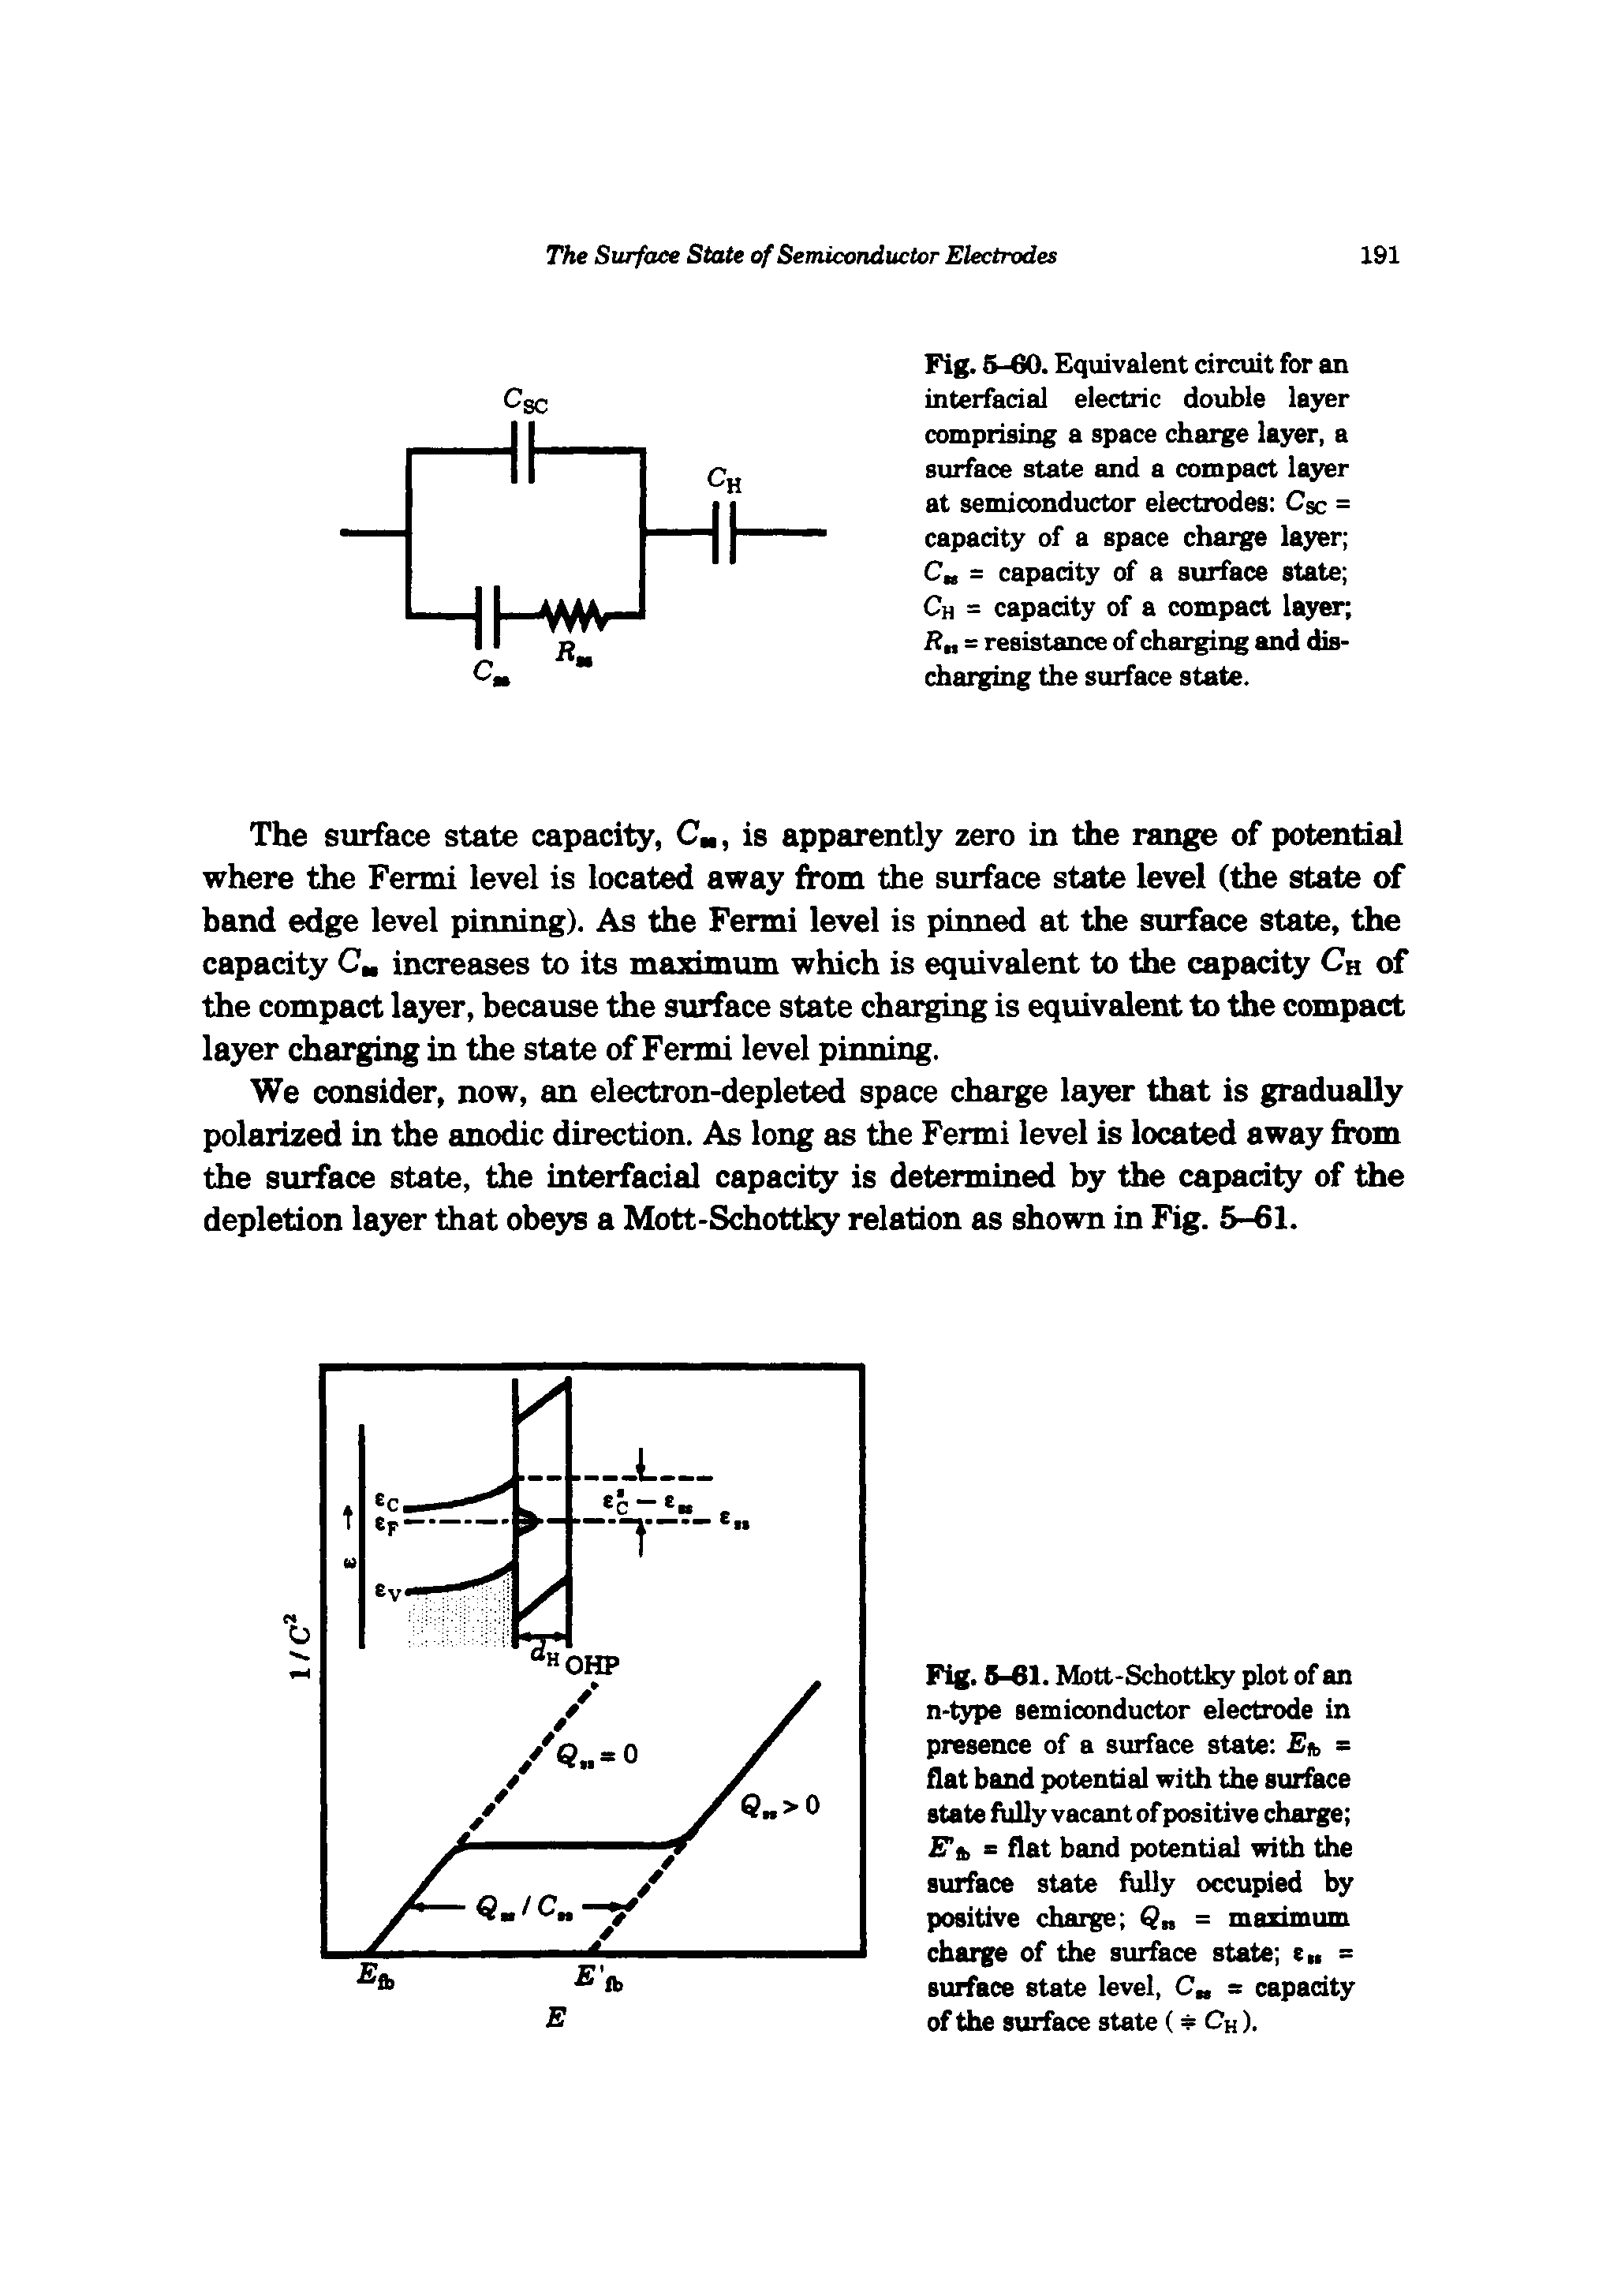 Fig. 5-60. Equivalent circuit for an interfacial electric double layer comprising a space charge layer, a surface state and a compact la3 er at semiconductor electrodes Csc = capacity of a space charge layer C = capacity of a surface state Ch = capacity of a compact layer An = resistance of charging and discharging the surface state.